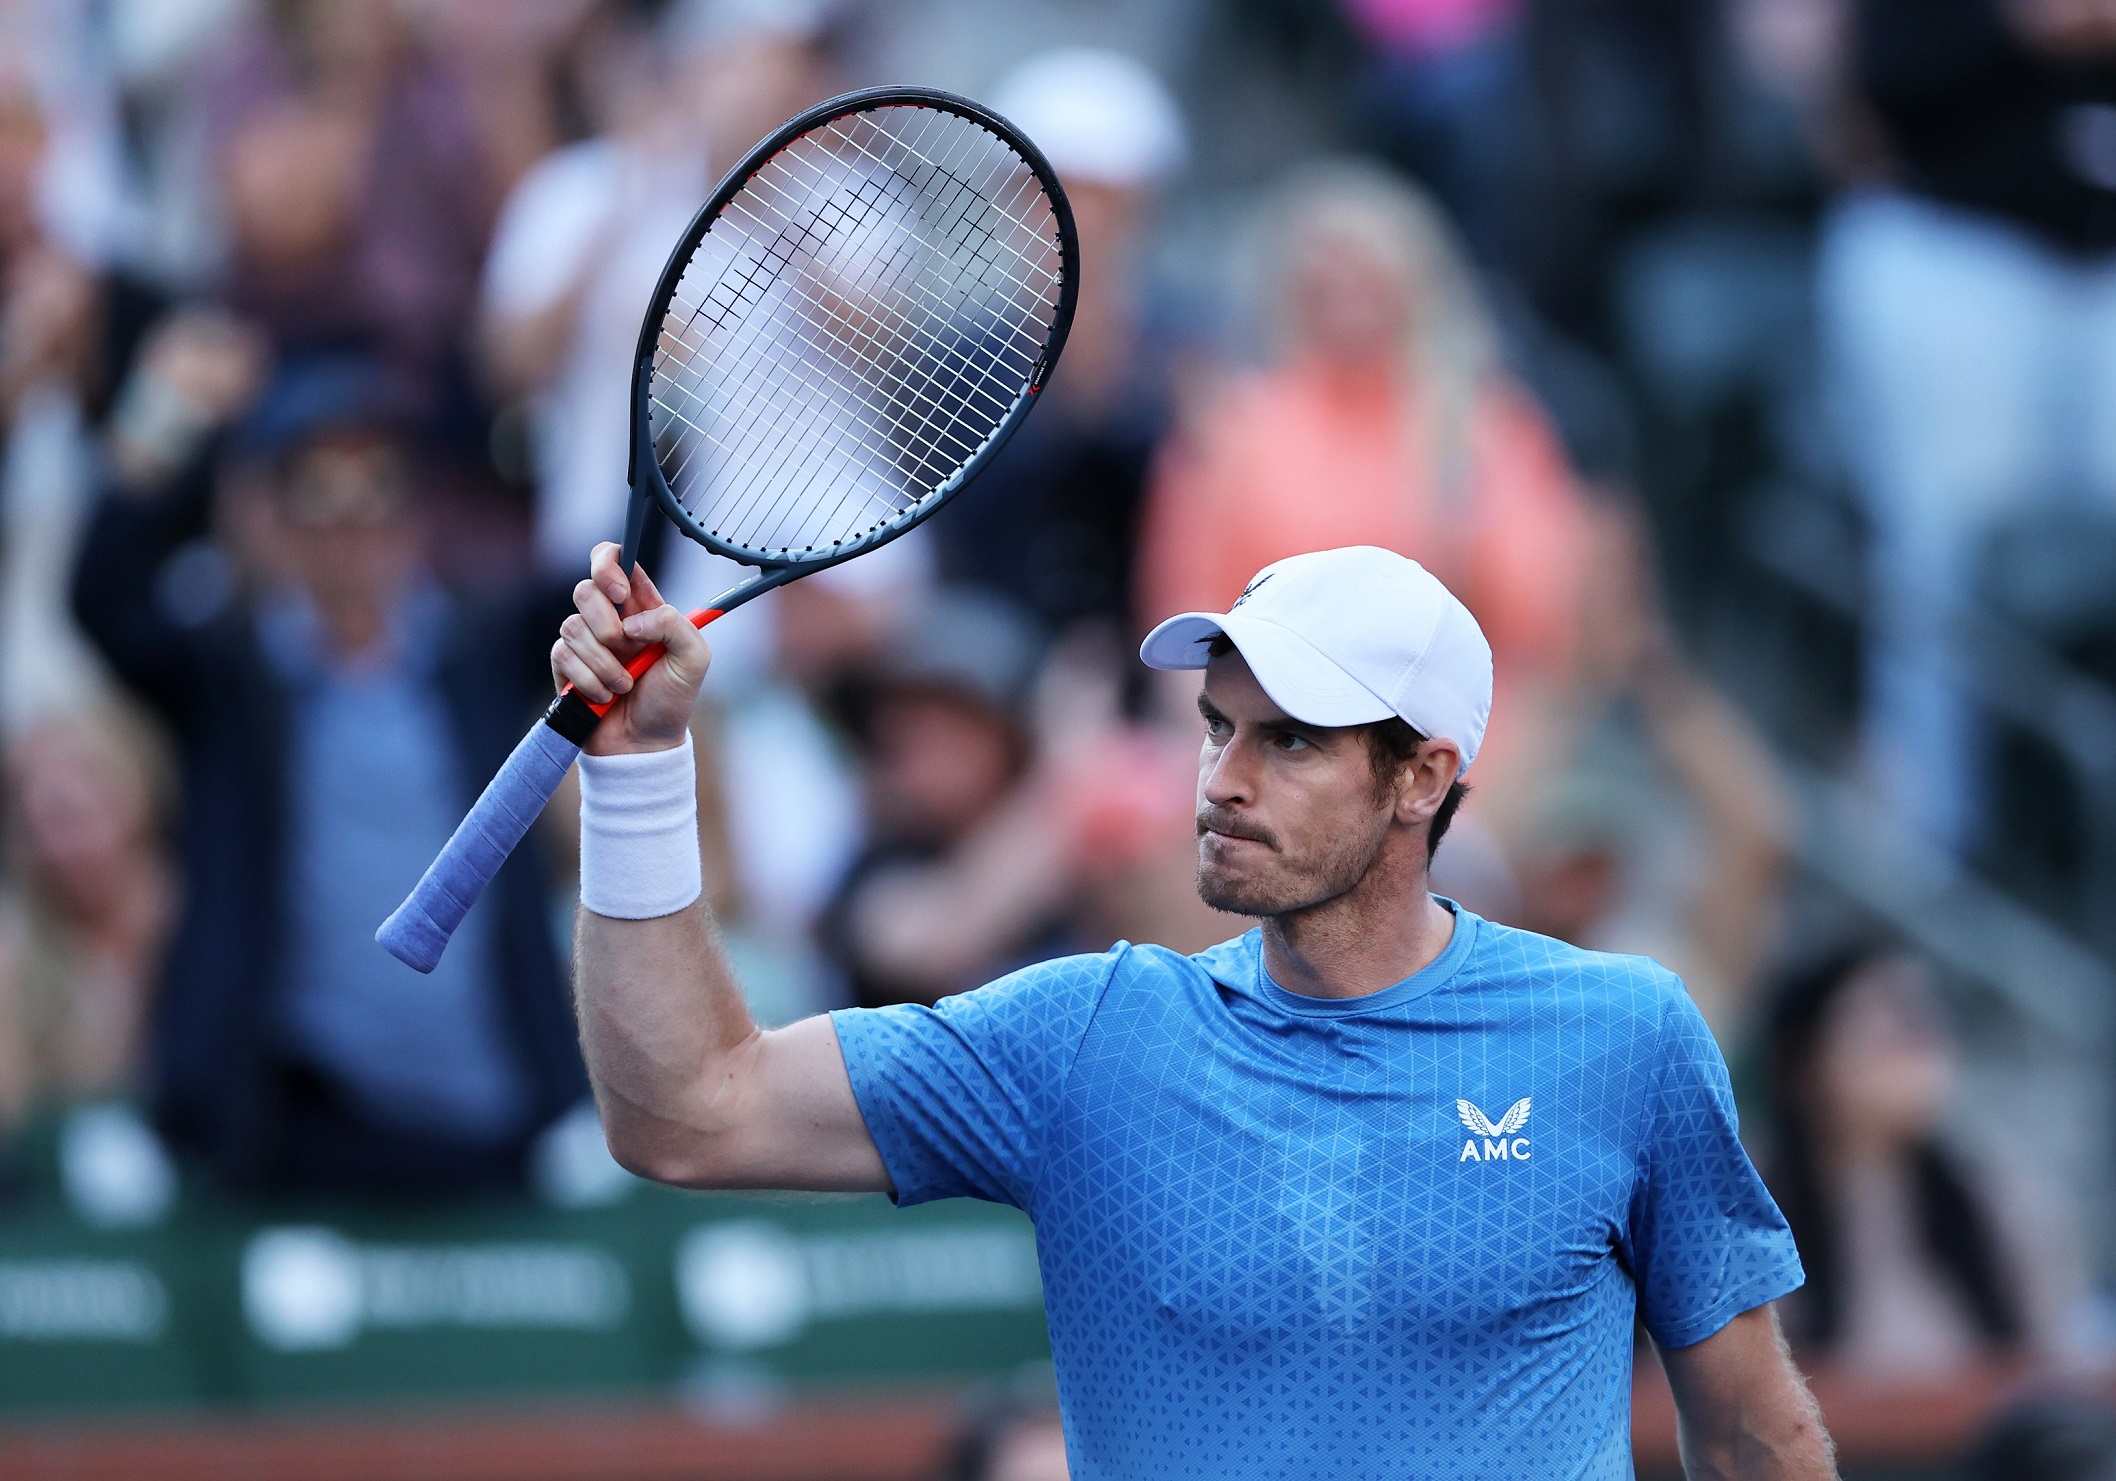 Two-Time Champion Andy Murray Completes Star Line-Up For Return Of Mubadala World Tennis Championship As Draw Revealed